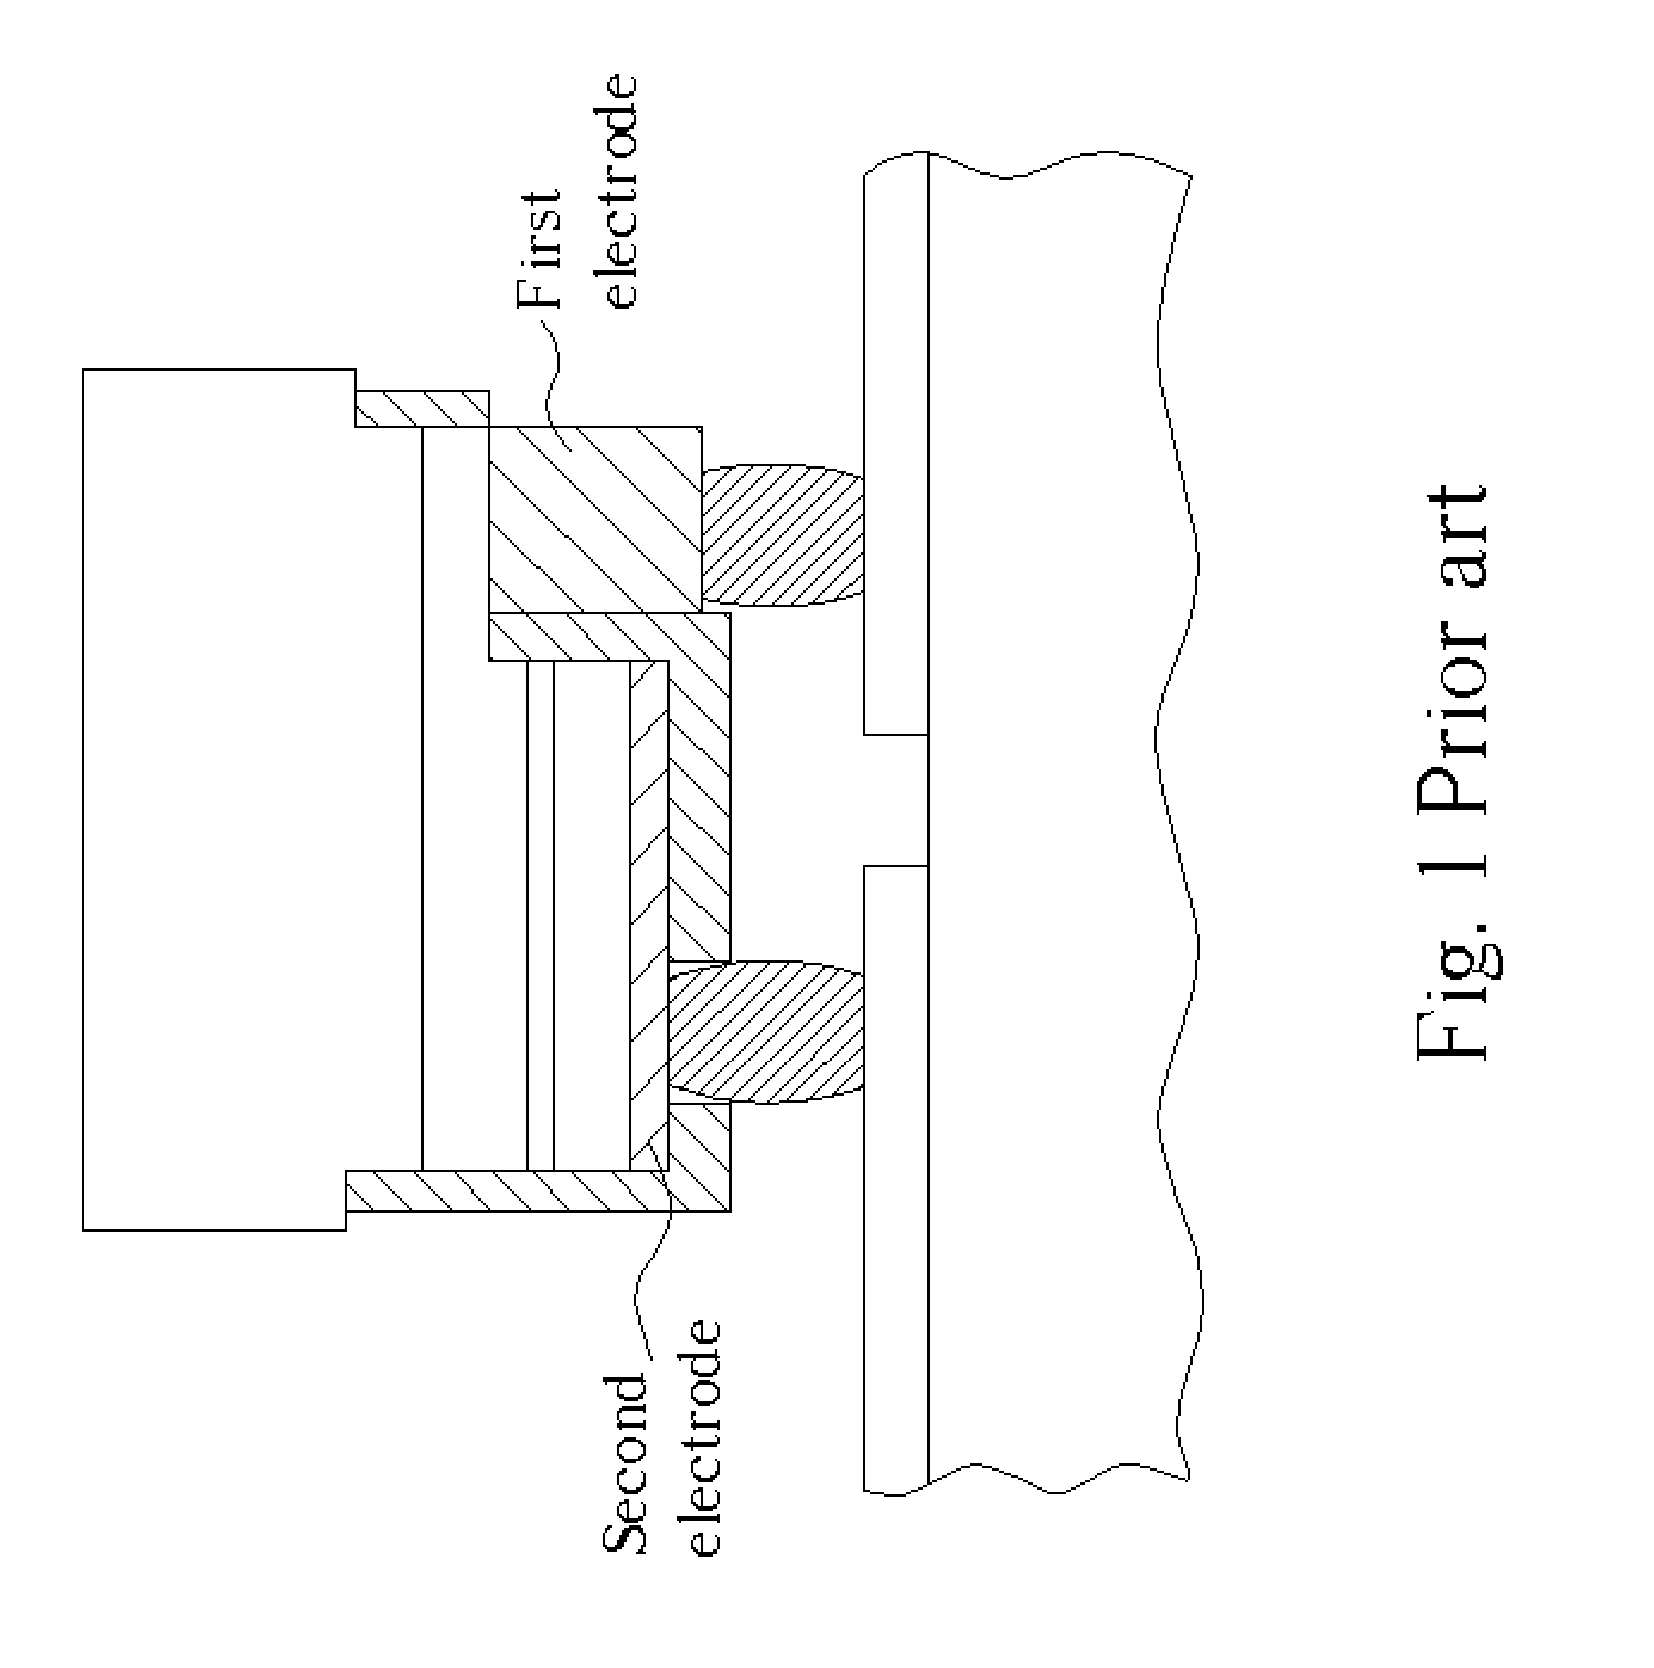 Flip-chip light-emitting device with micro-reflector